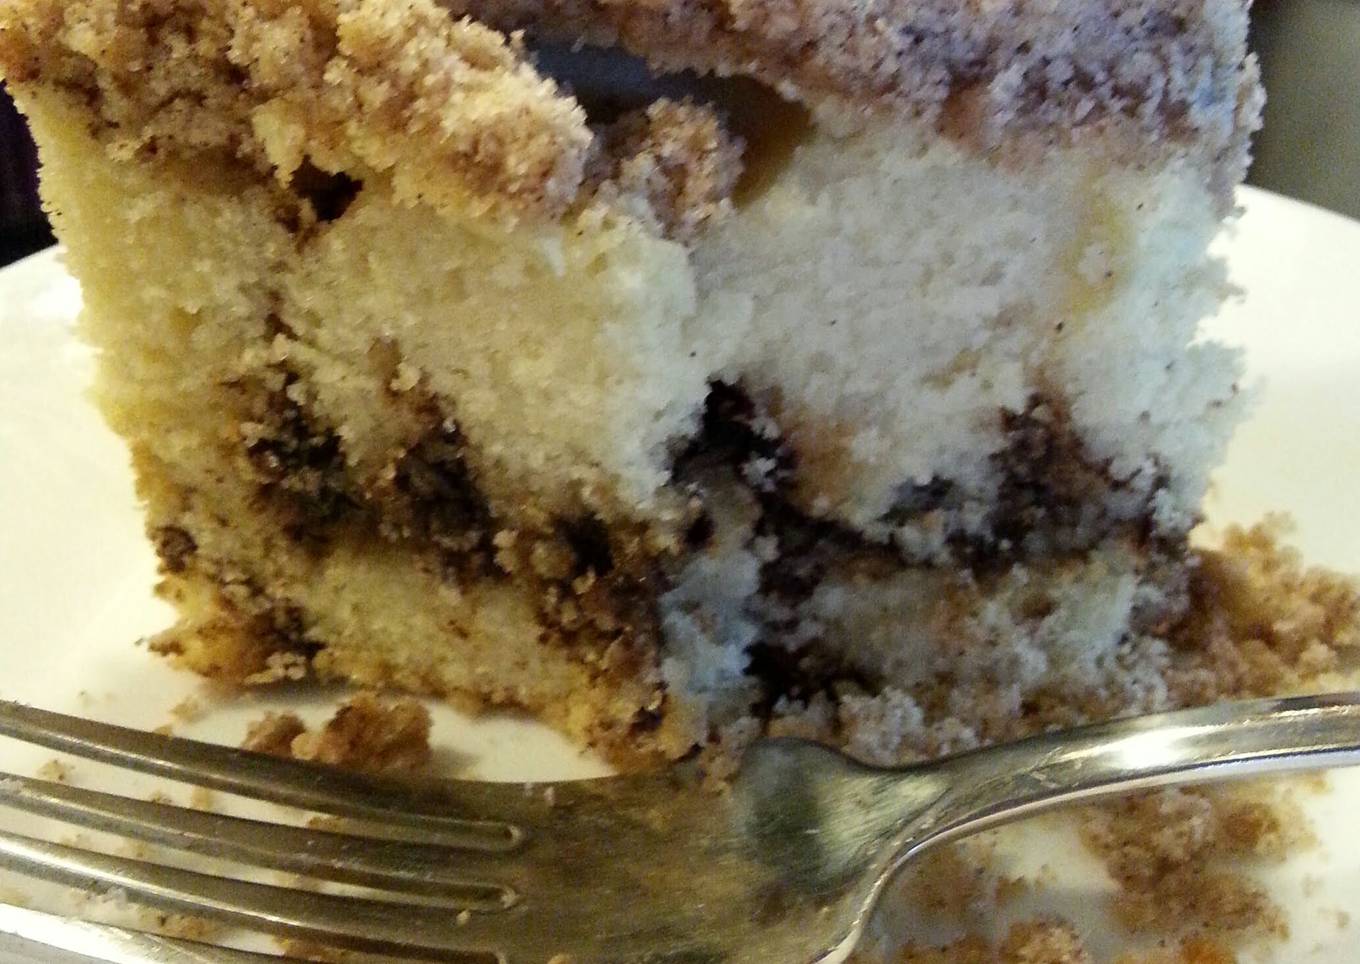 Coffee cake with sour cream and extra cinnamon crumbs